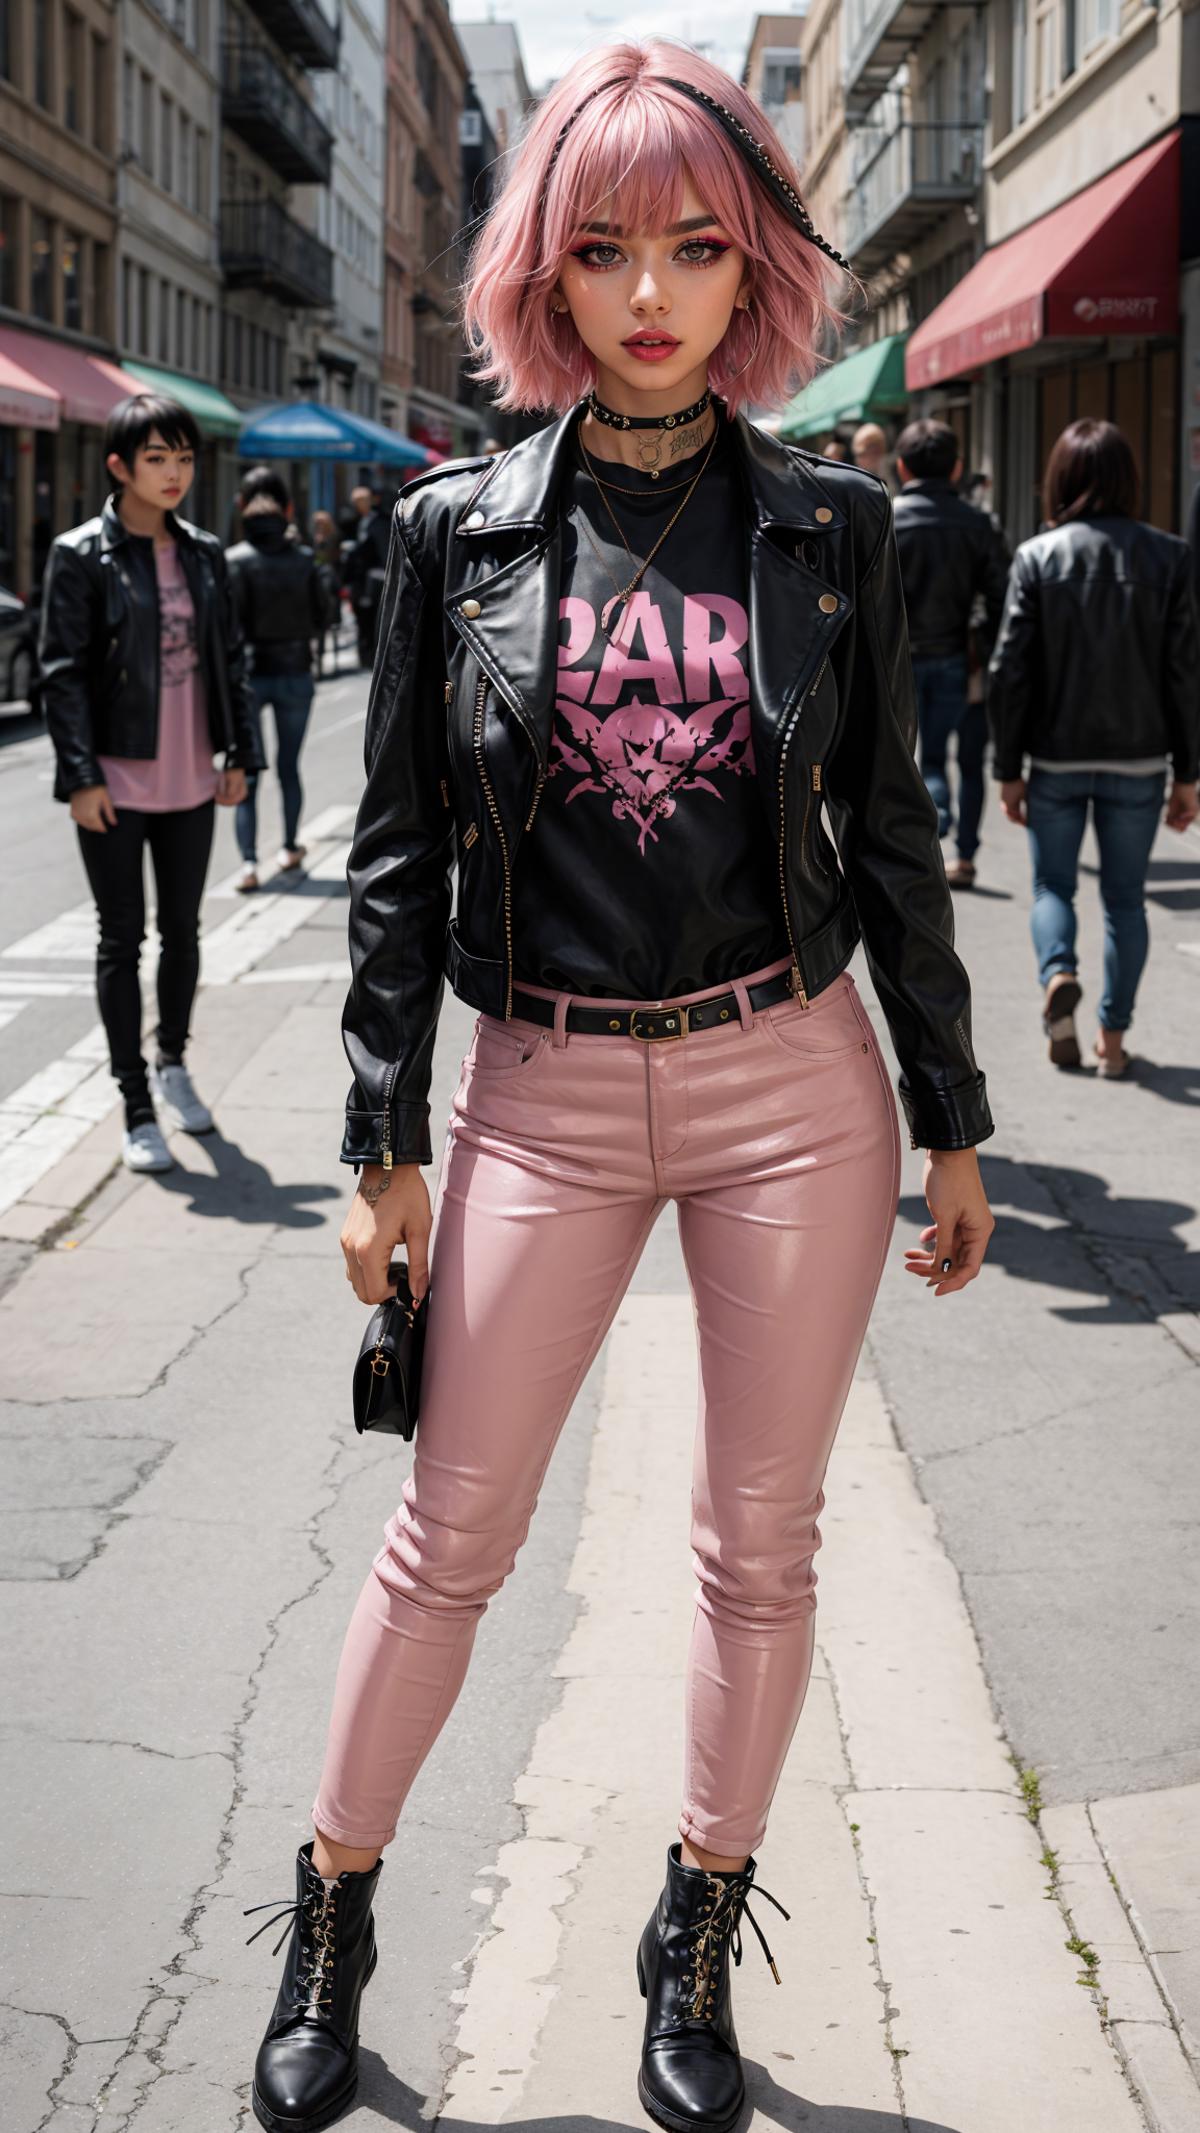 A woman in a black jacket and pink pants, wearing a shirt that says "Par."